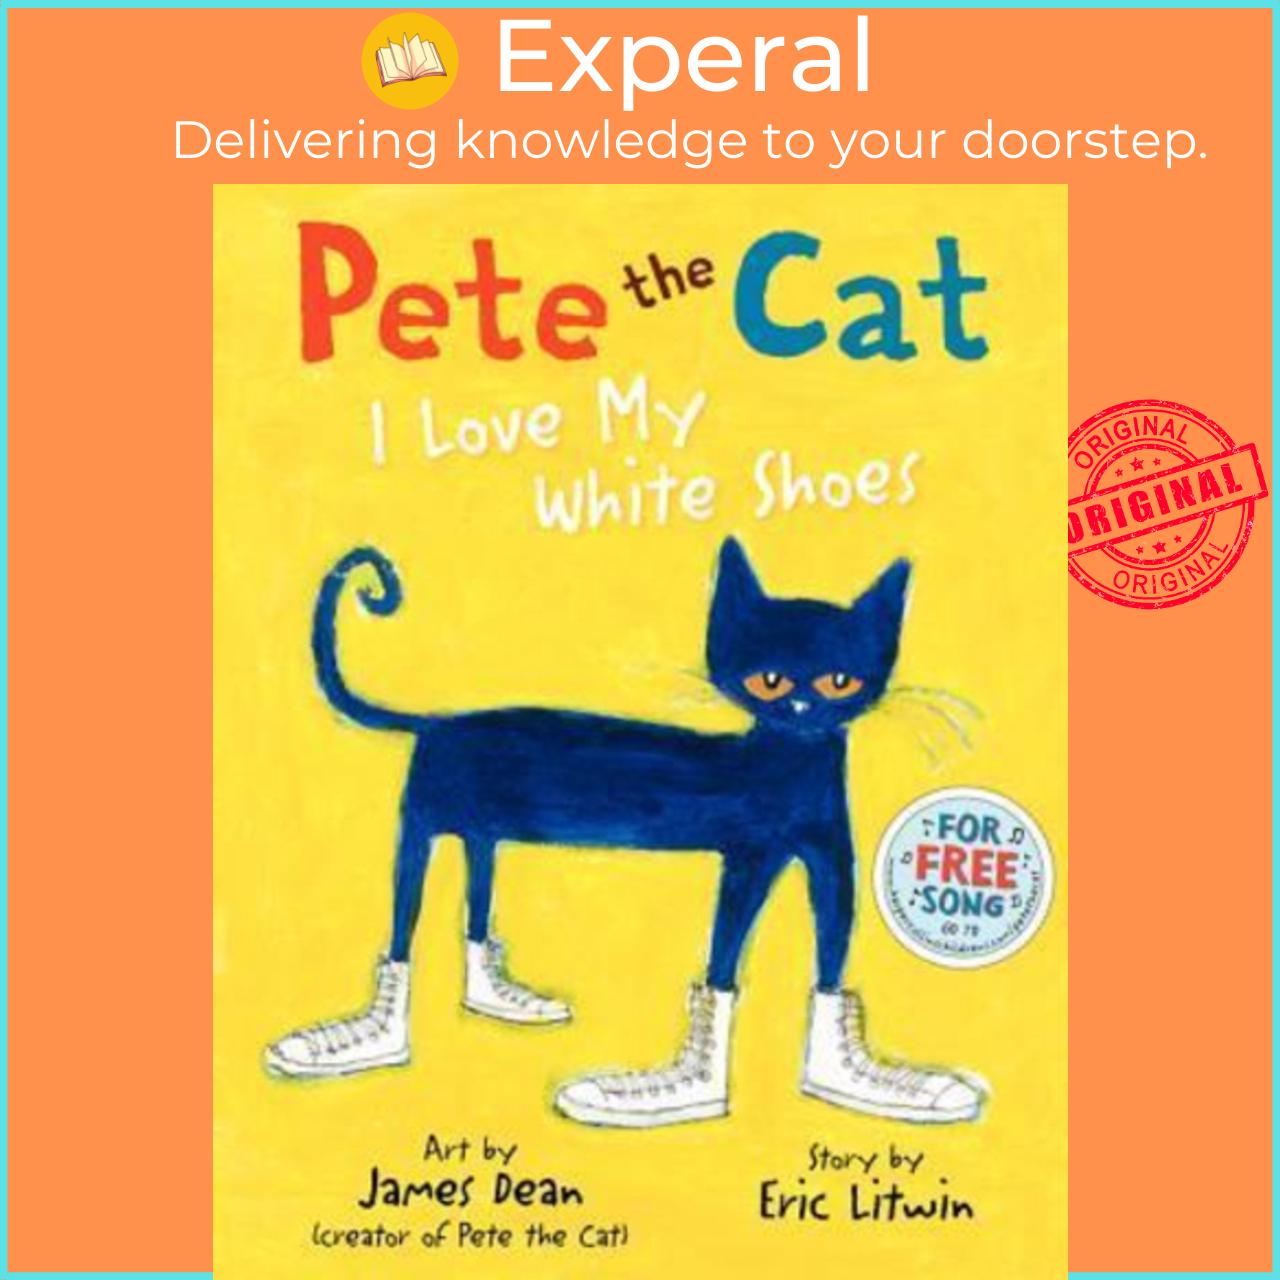 Mua Sách - Pete the Cat : I Love My White Shoes by Eric Litwin (US edition,  hardcover) tại Experal